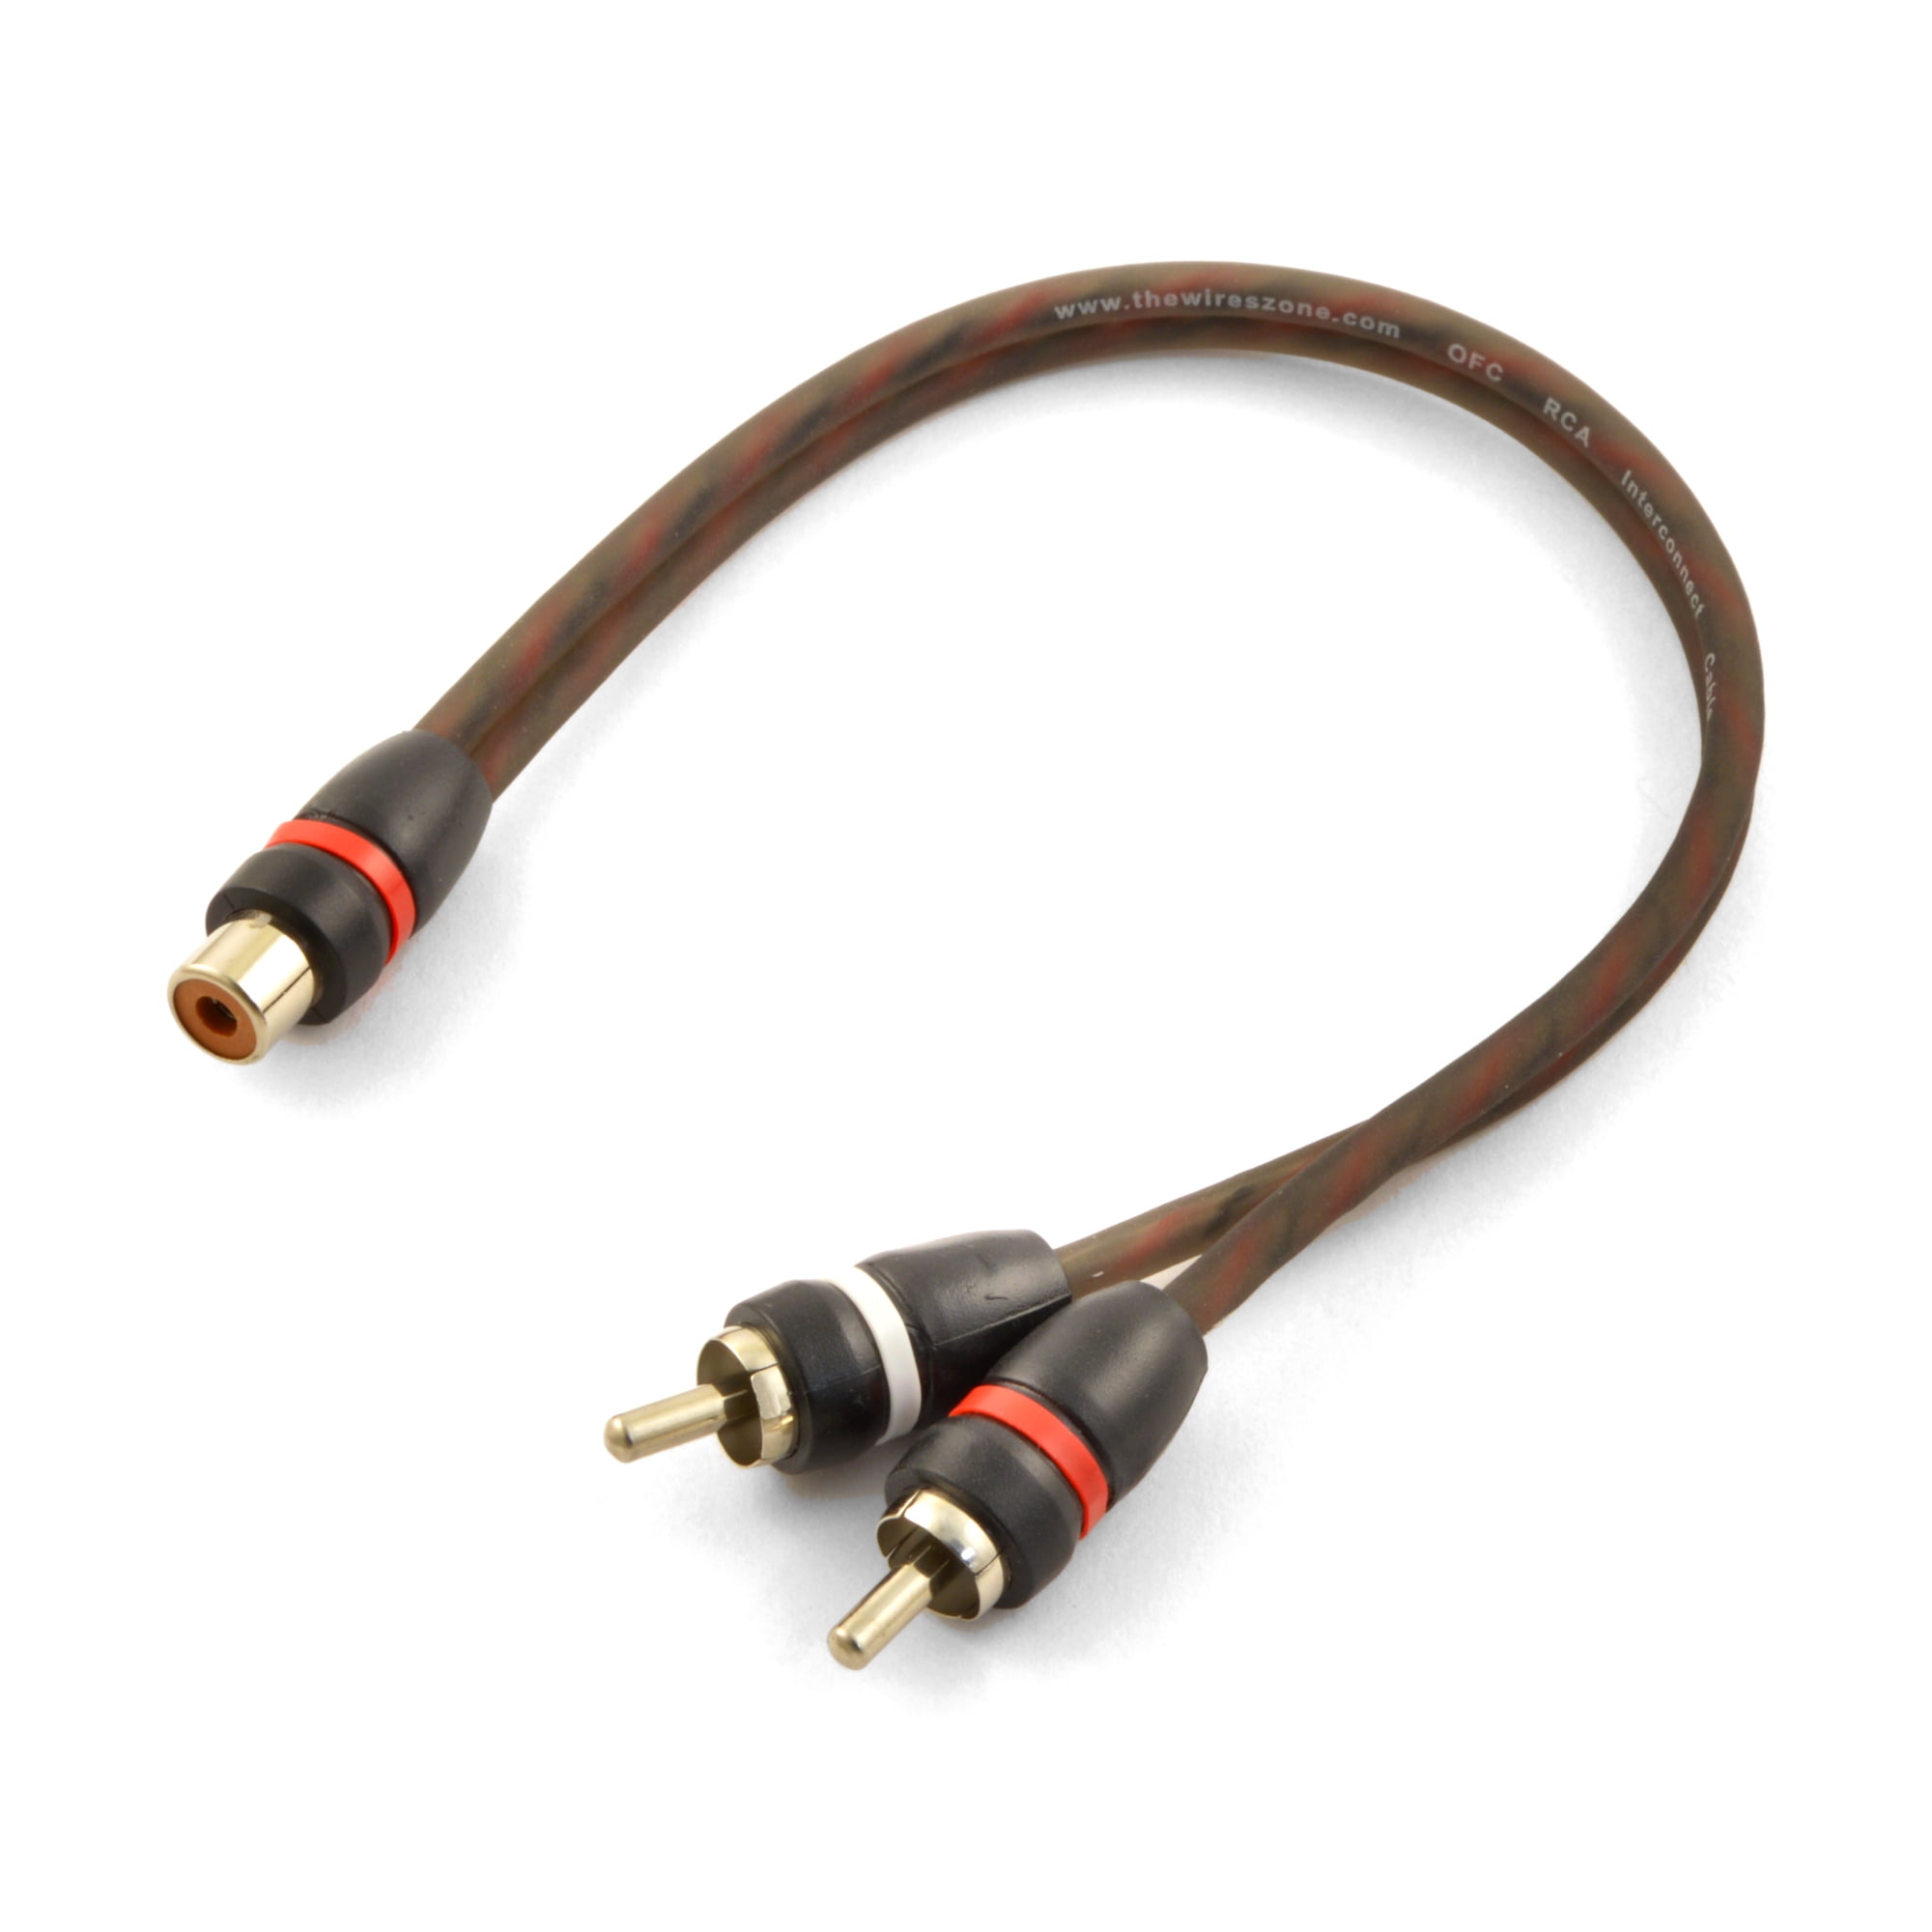 Rca Ah910r Stereo Audio Cable (10ft)